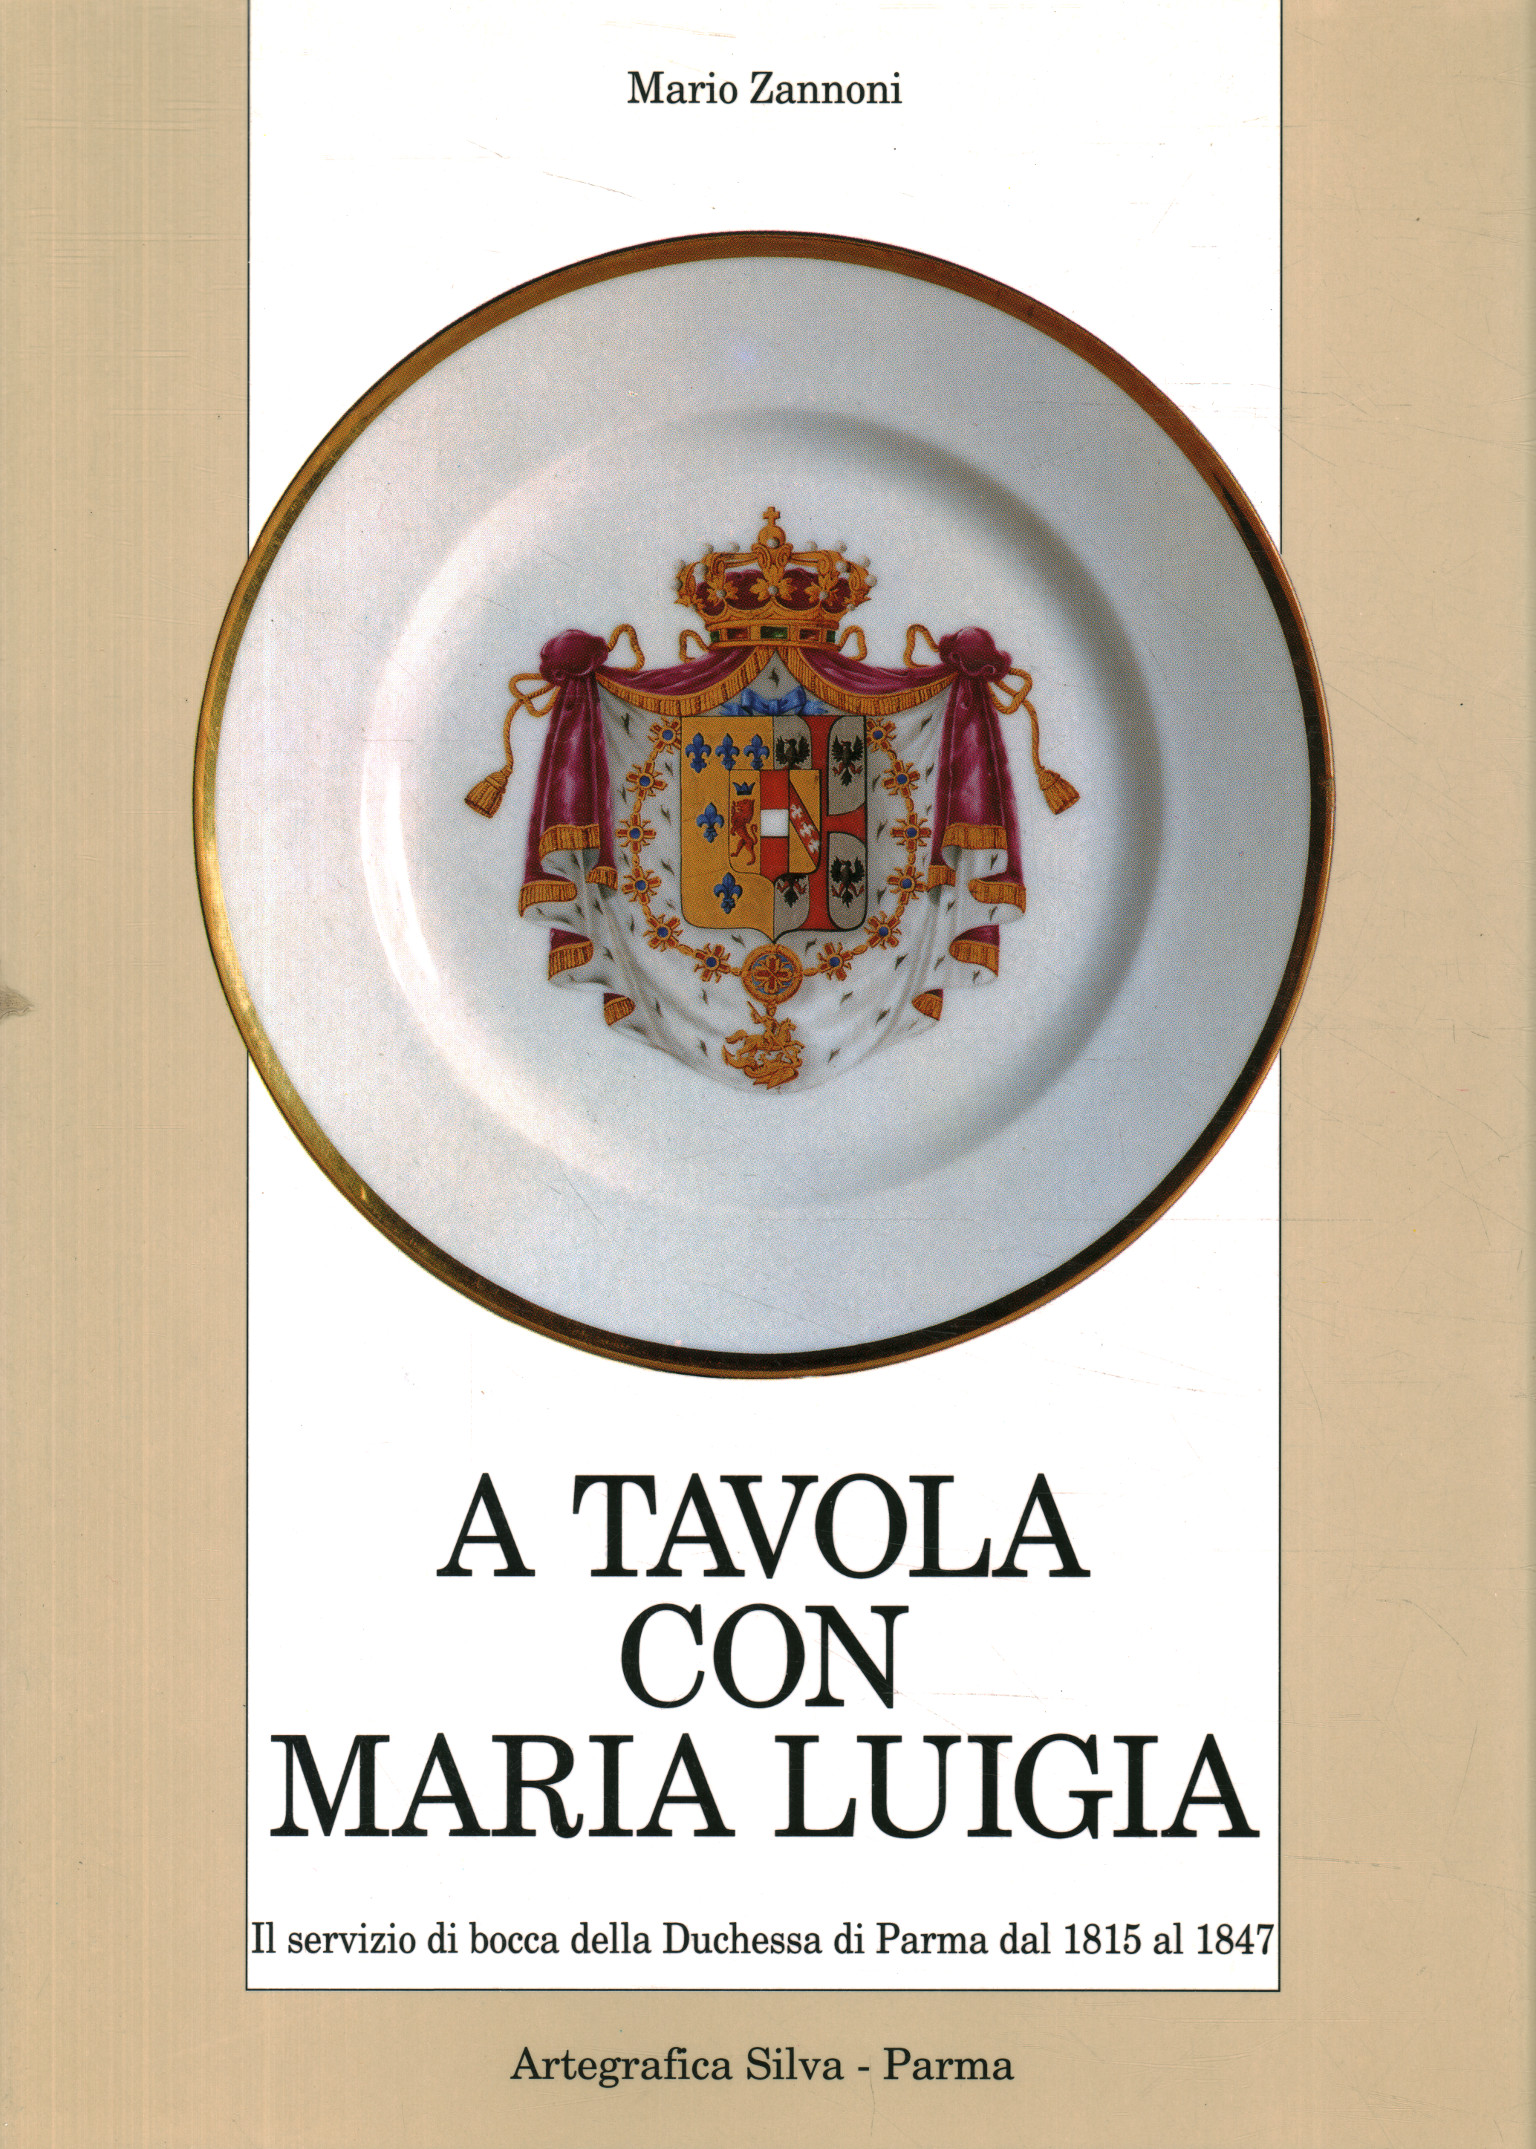 At the table with Maria Luigia